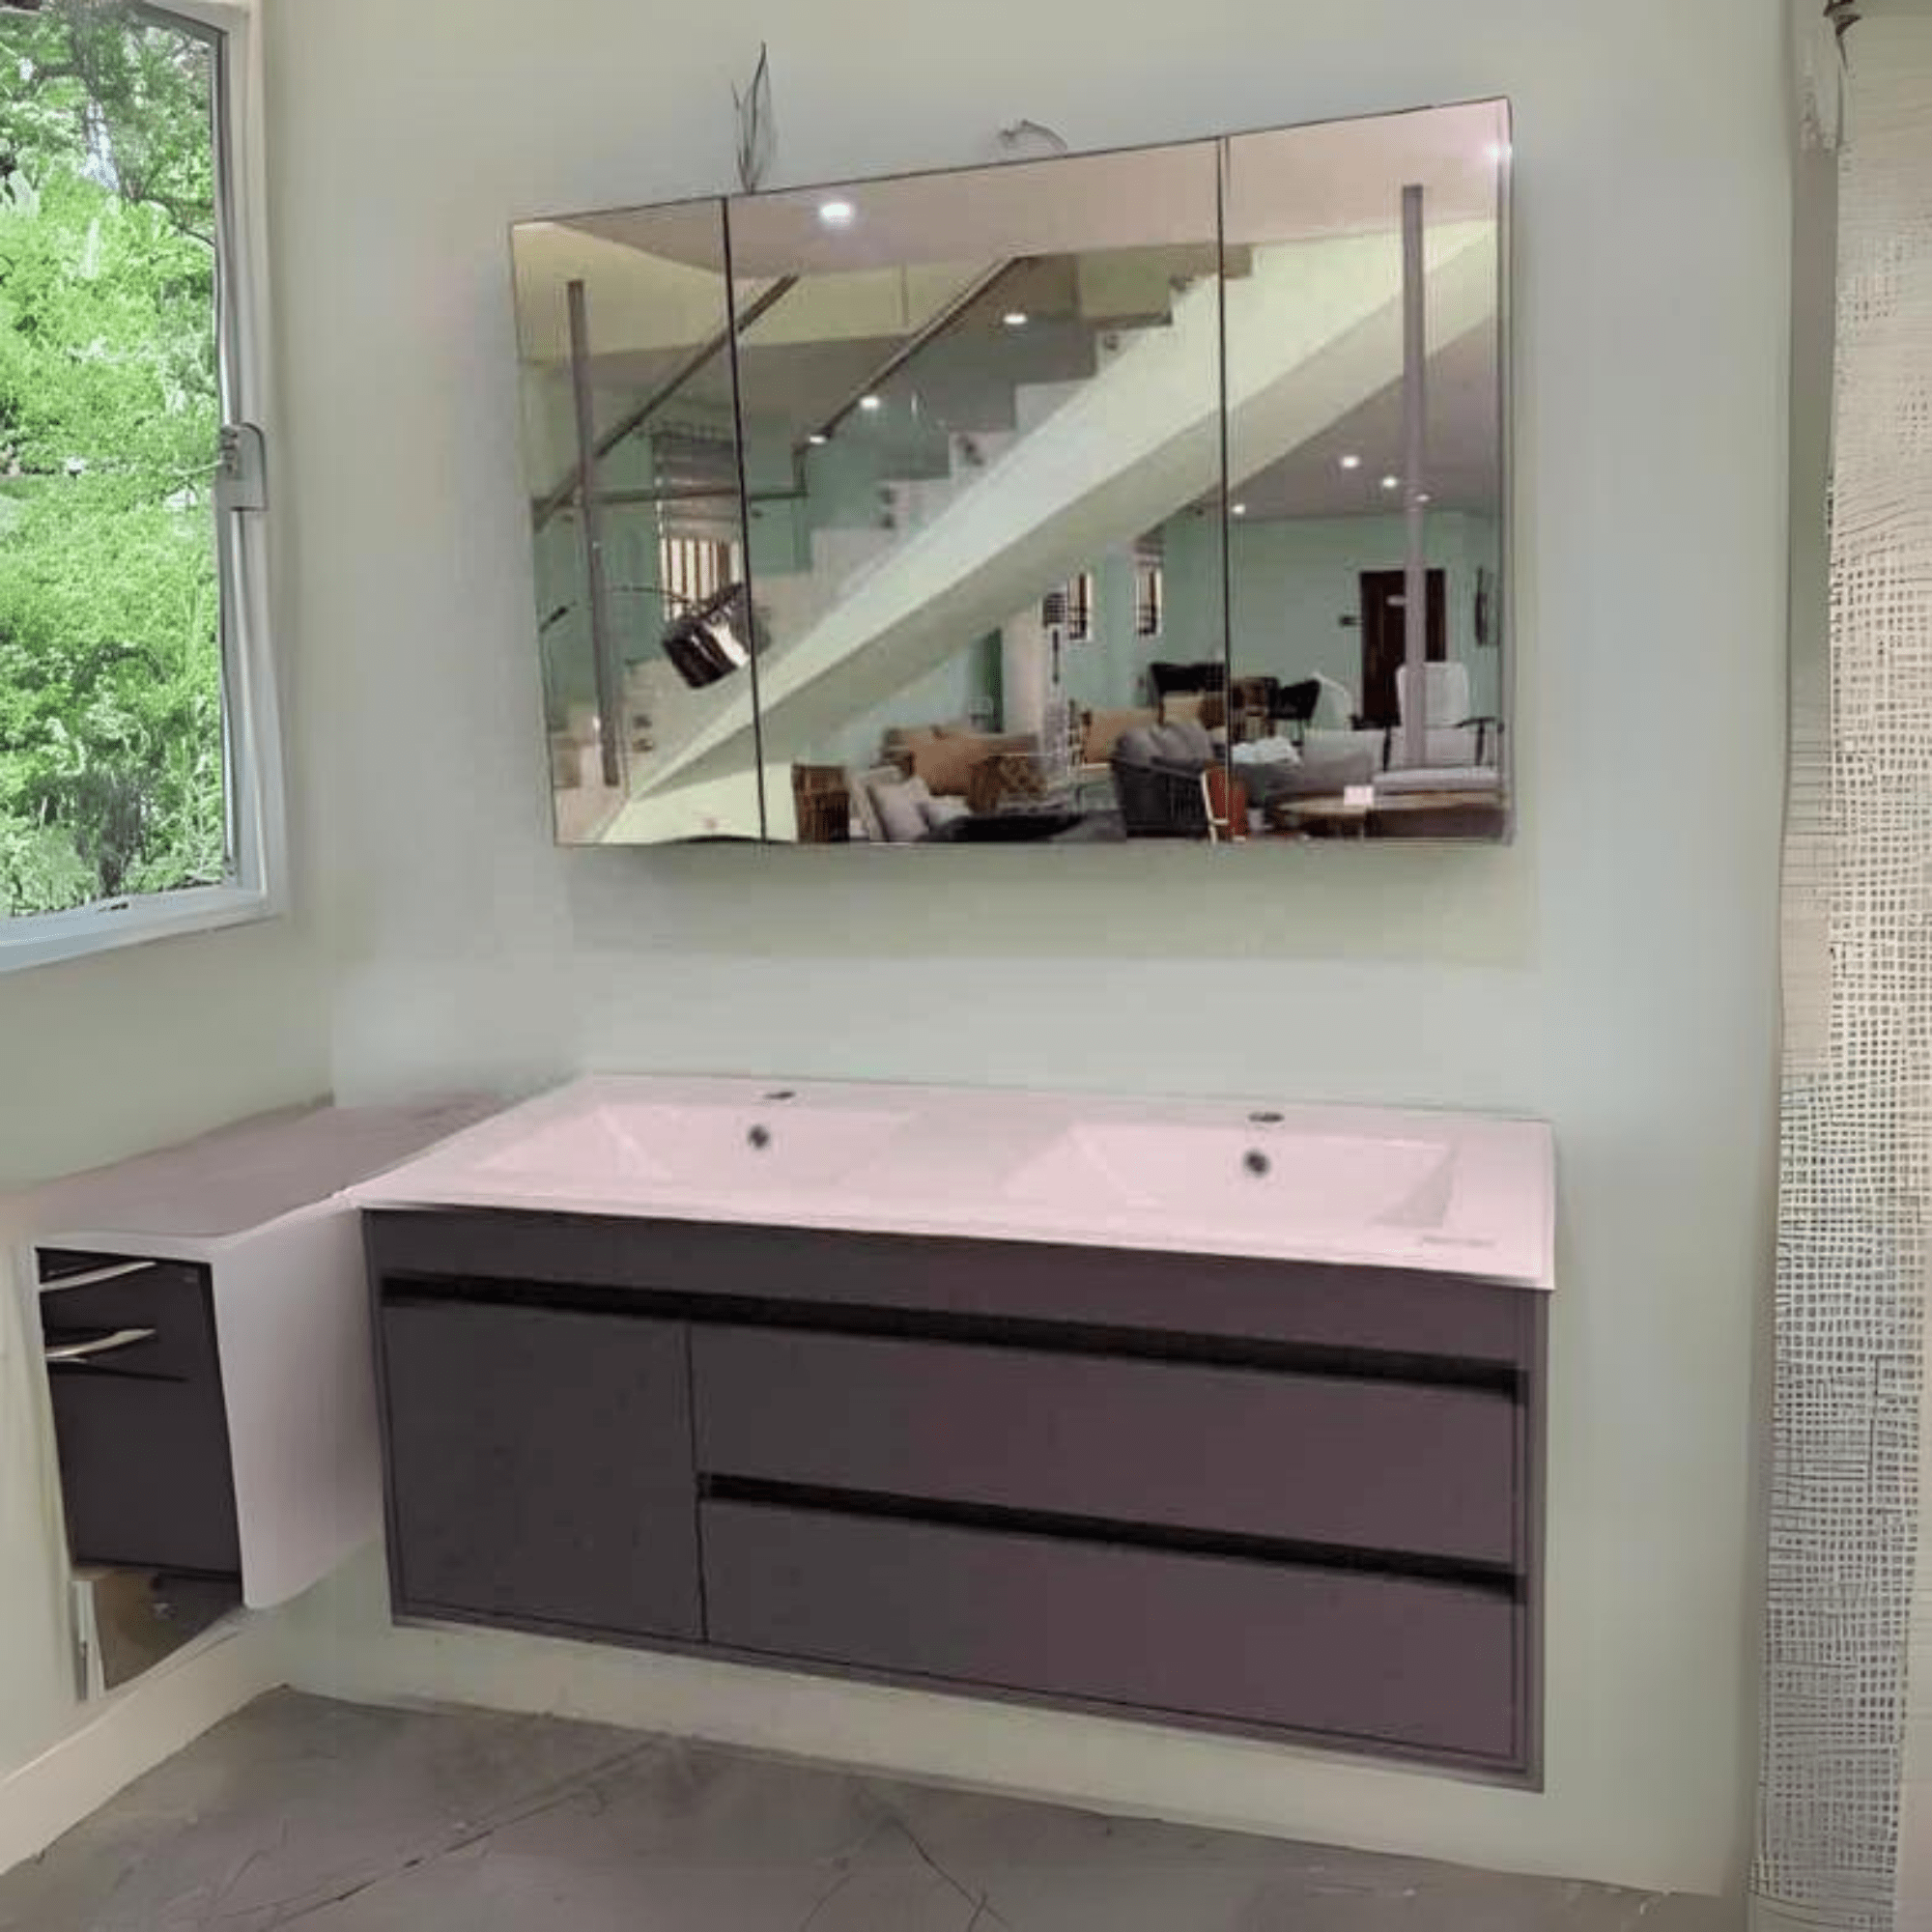 Buy Bathroom Luxury 120cm Double Basin Wall-Mounted Vanity Cabinet with Mirror - ZB5580 | Shop at Supply Master Accra, Ghana Bathroom Vanity & Cabinets Buy Tools hardware Building materials